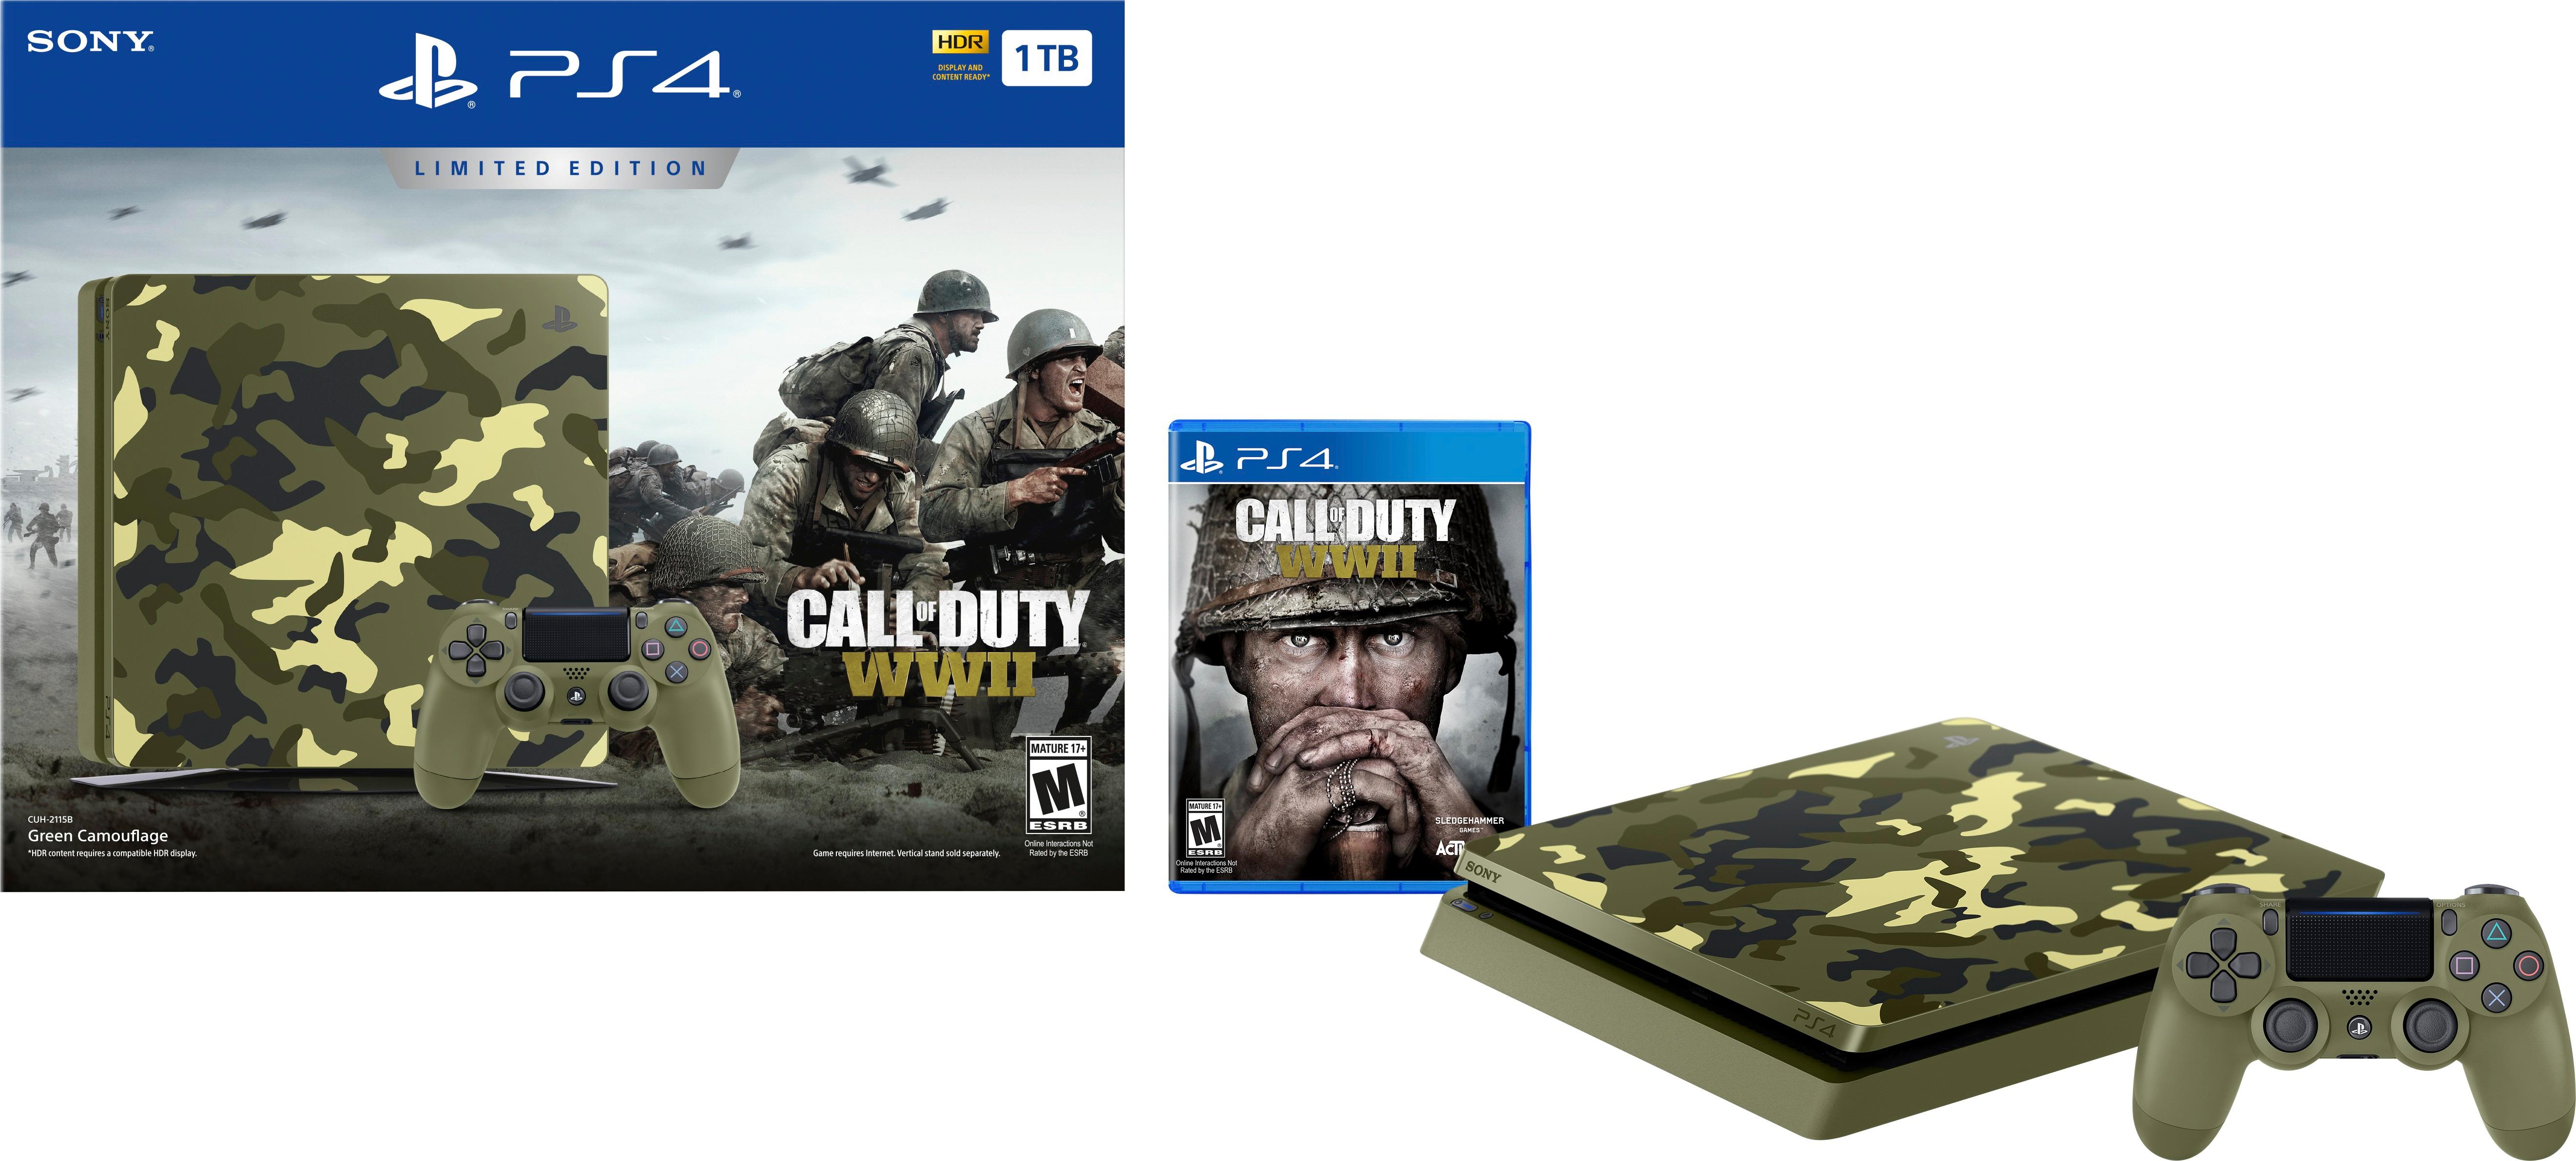 call of duty ps4 console